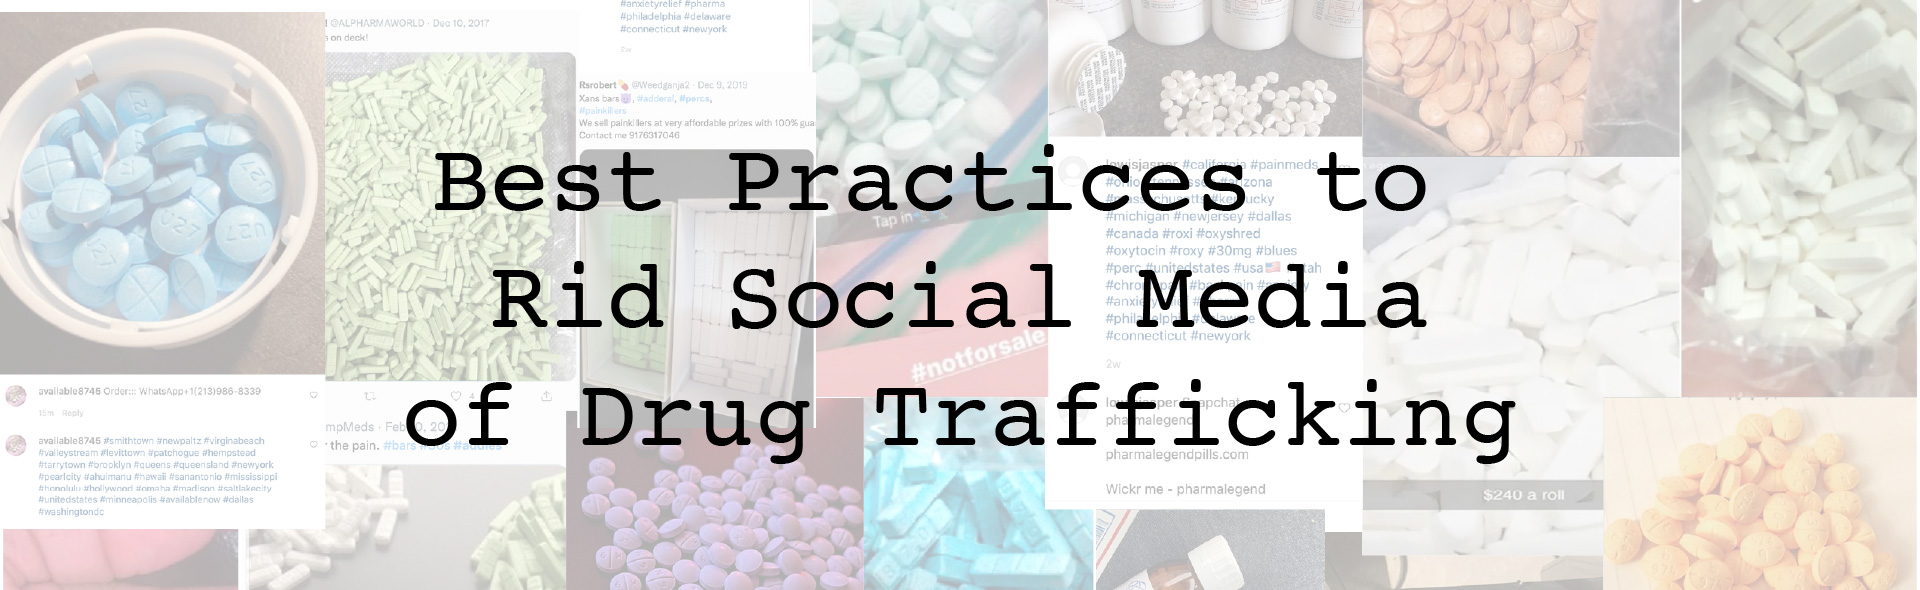 Best
Practices
to Rid Social Media
of Drug Trafficking